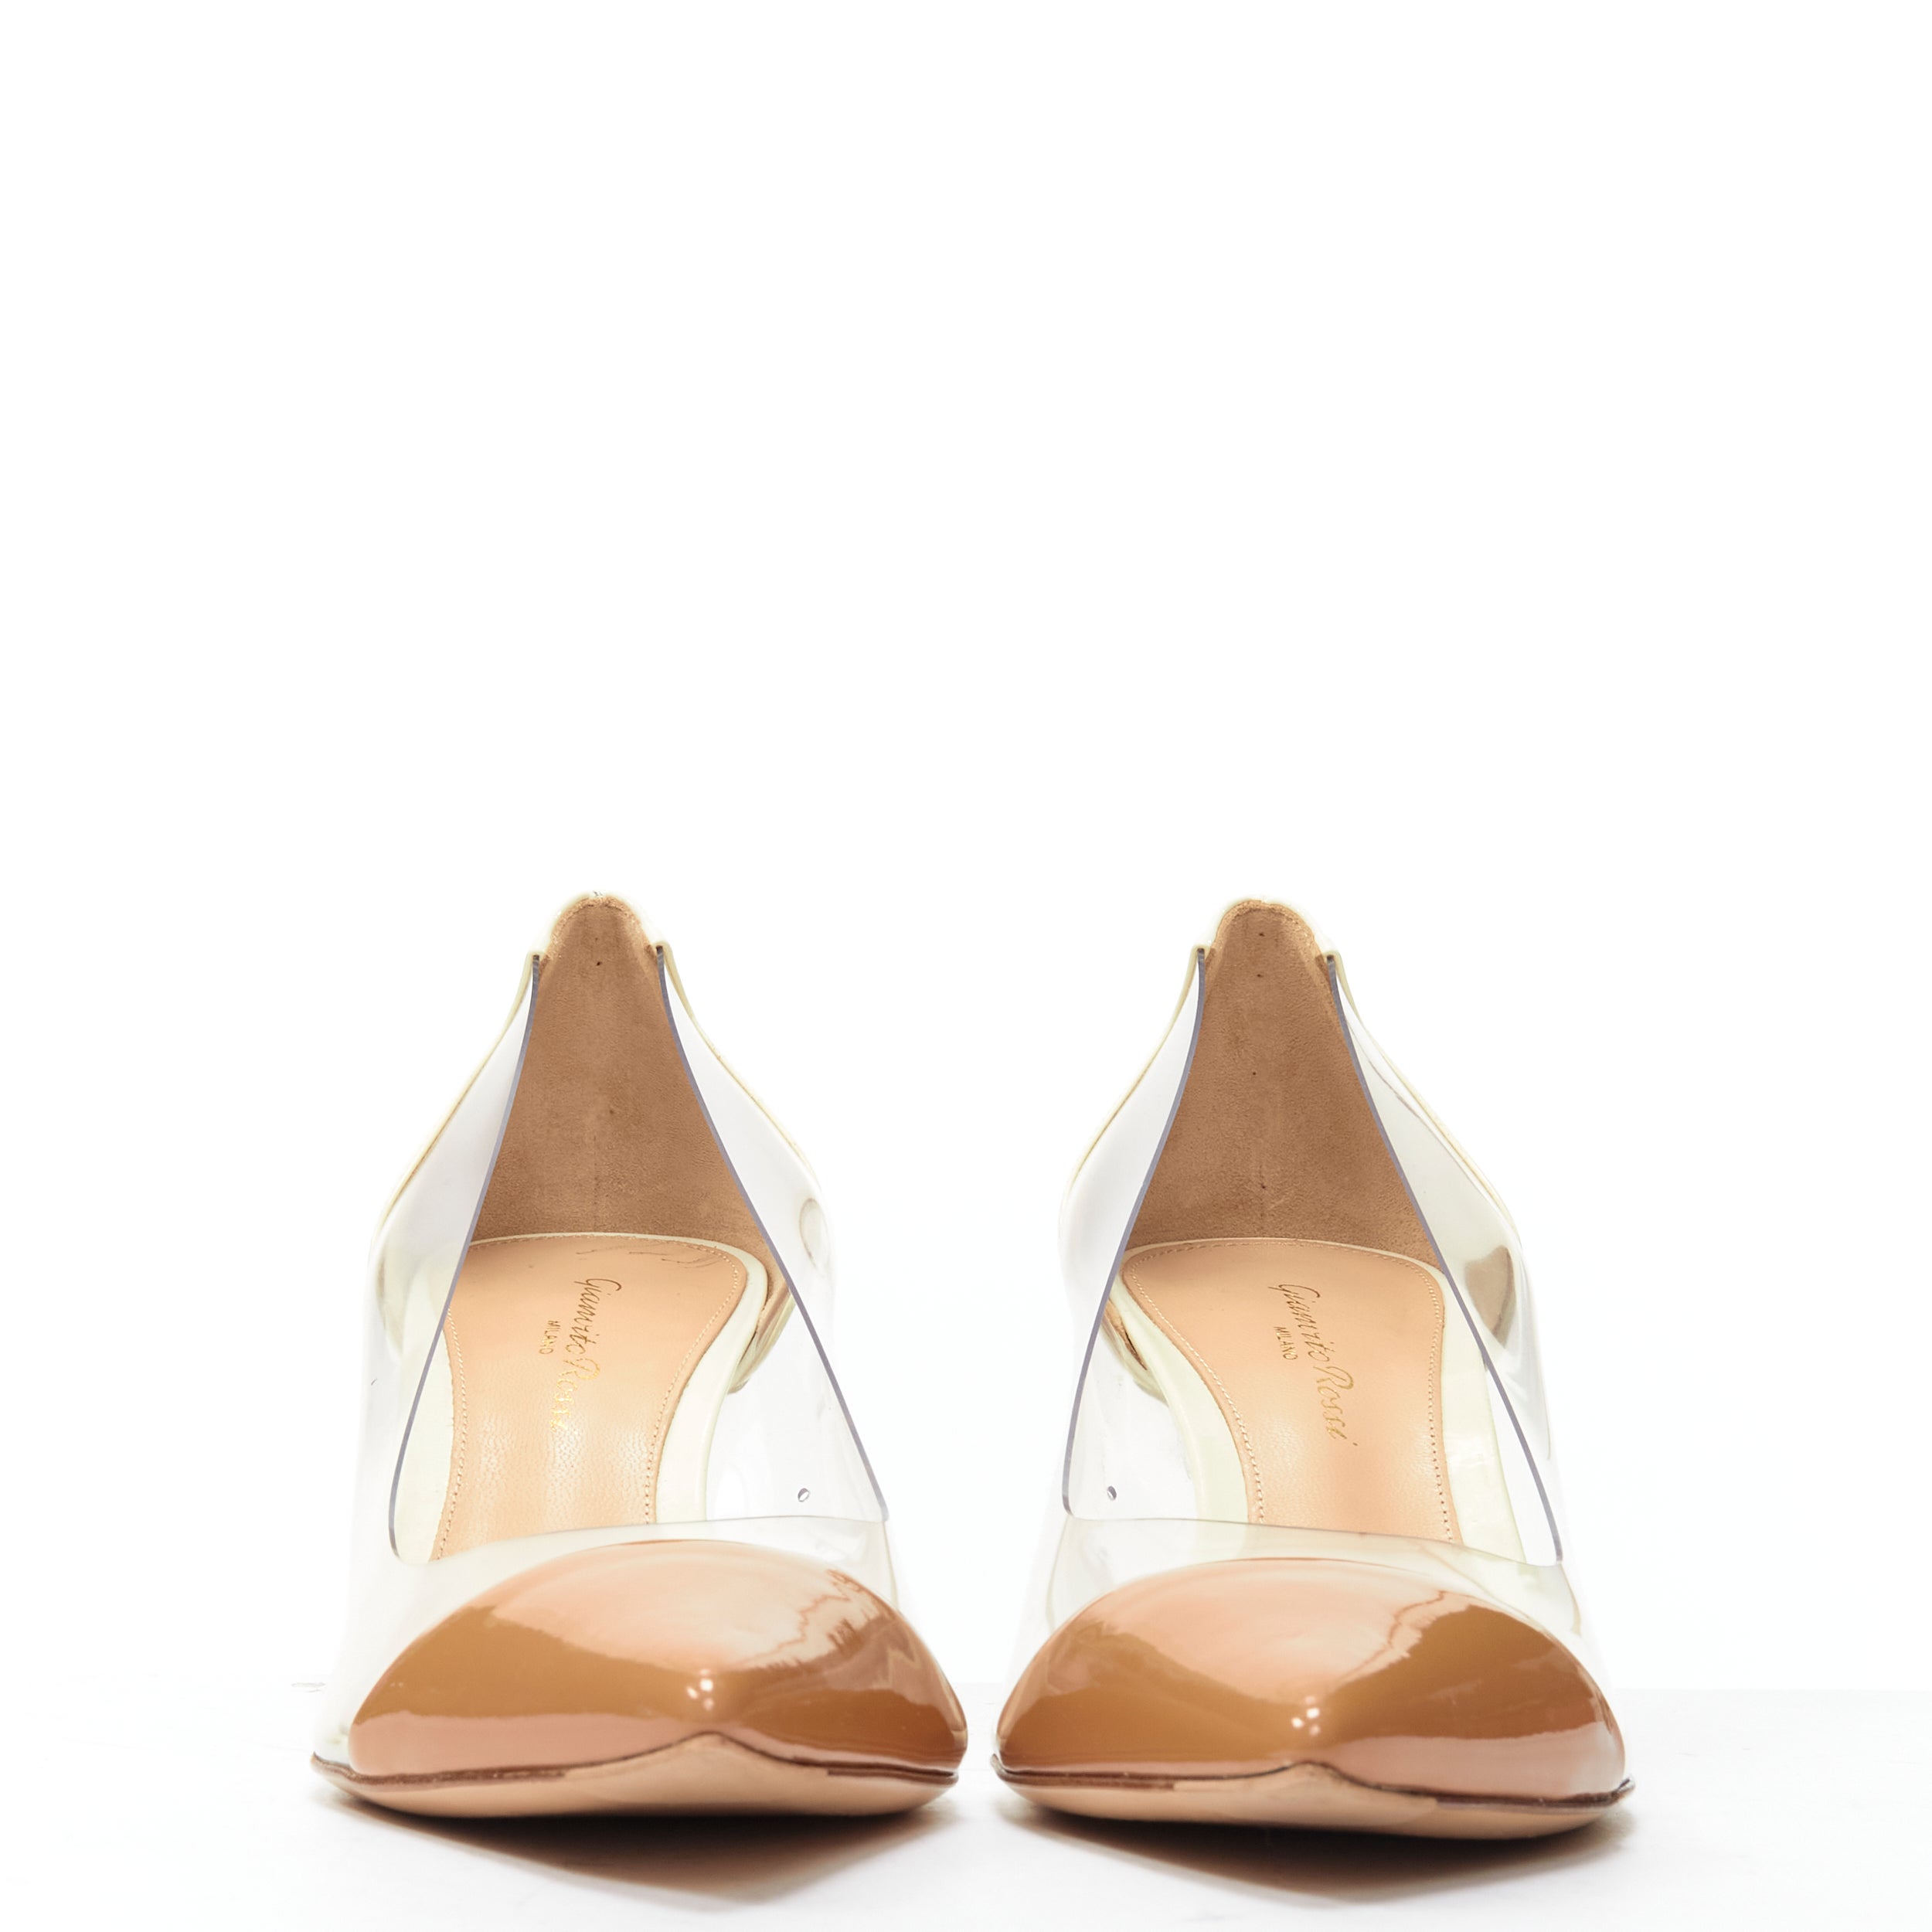 GIANVITO ROSSI Plexi Vernice Powder cream patent PVC toe cap heel pump EU37.5 
Reference: MELK/A00217 
Brand: Gianvito Rossi 
Model: Plexi 
Material: Patent Leather 
Color: Beige 
Pattern: Solid 
Made in: Italy 

CONDITION: 
Condition: Excellent,